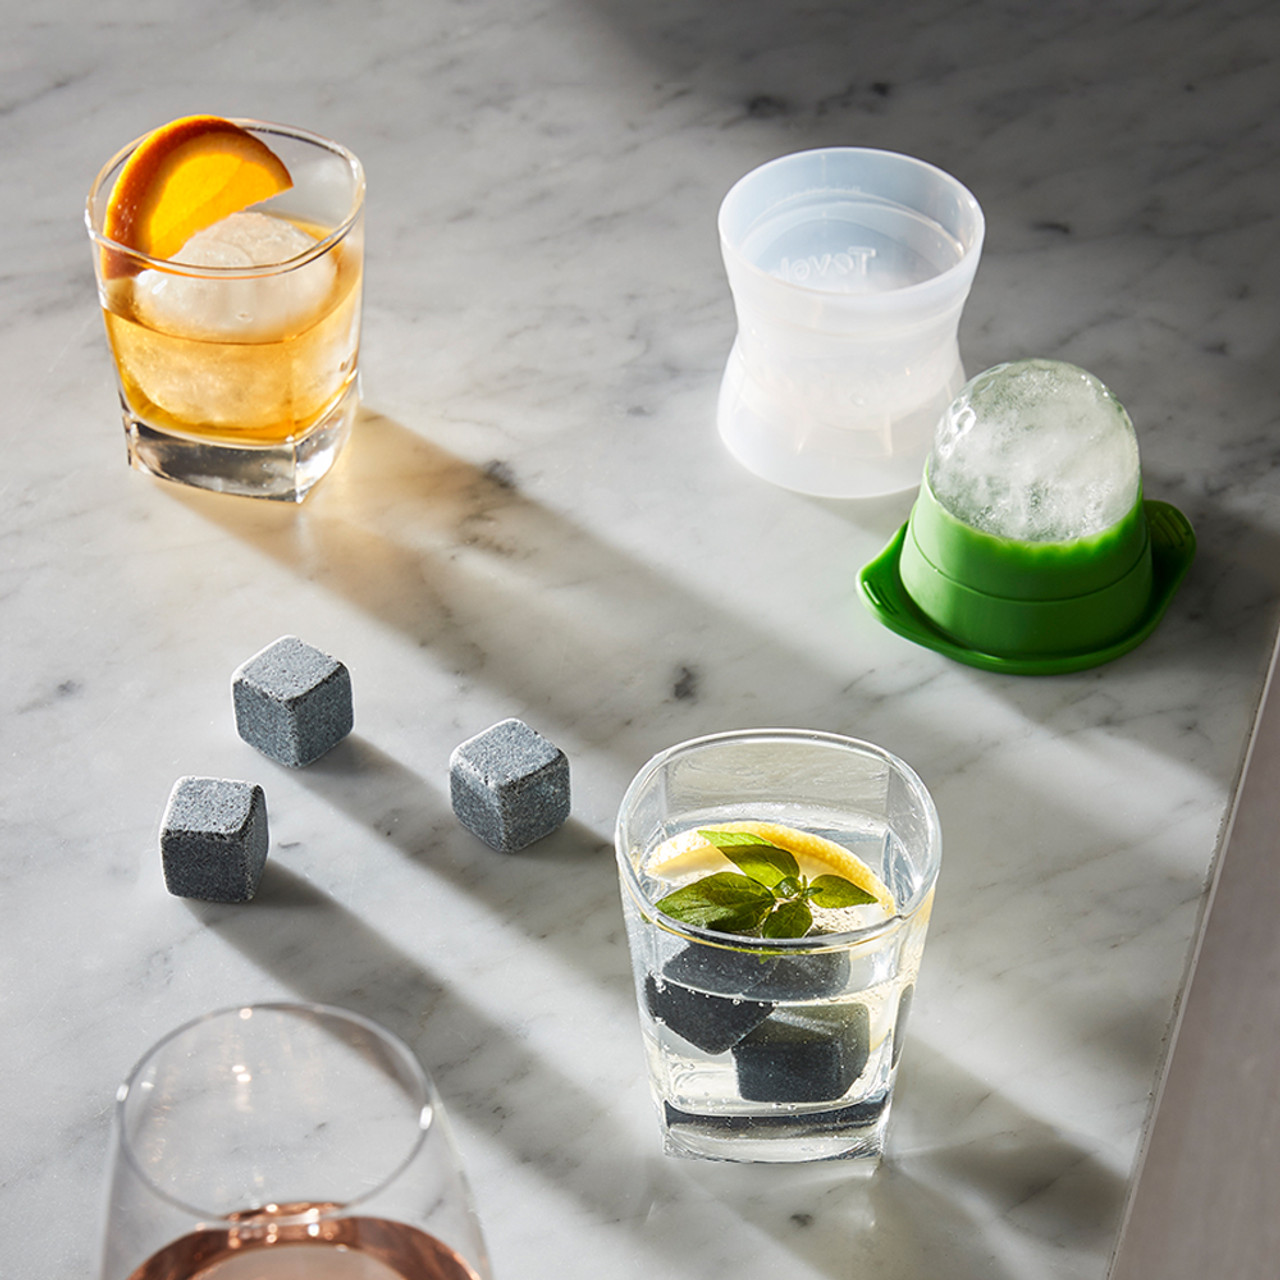 Tovolo, Highball Ice Molds - Melbourne Food Depot, Melbourne